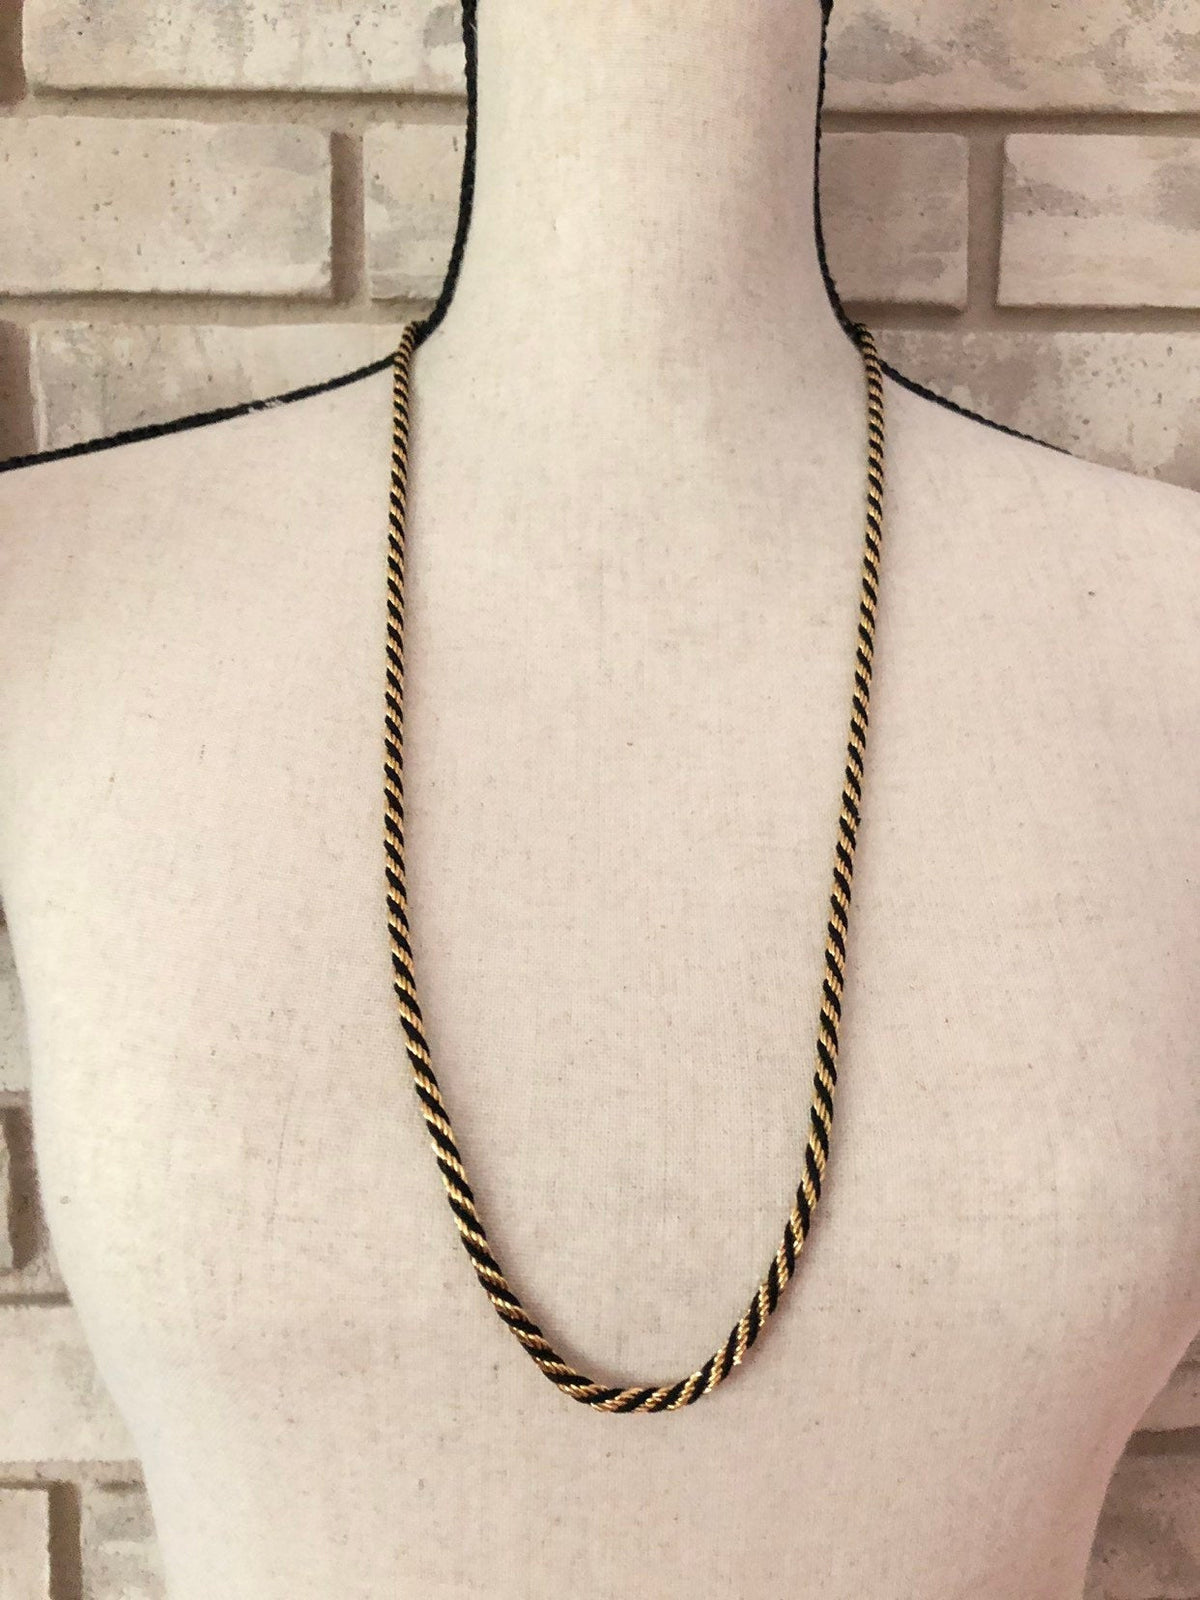 Napier Black & Gold Long Vintage Layering Chain Necklace - 24 Wishes Vintage Jewelry